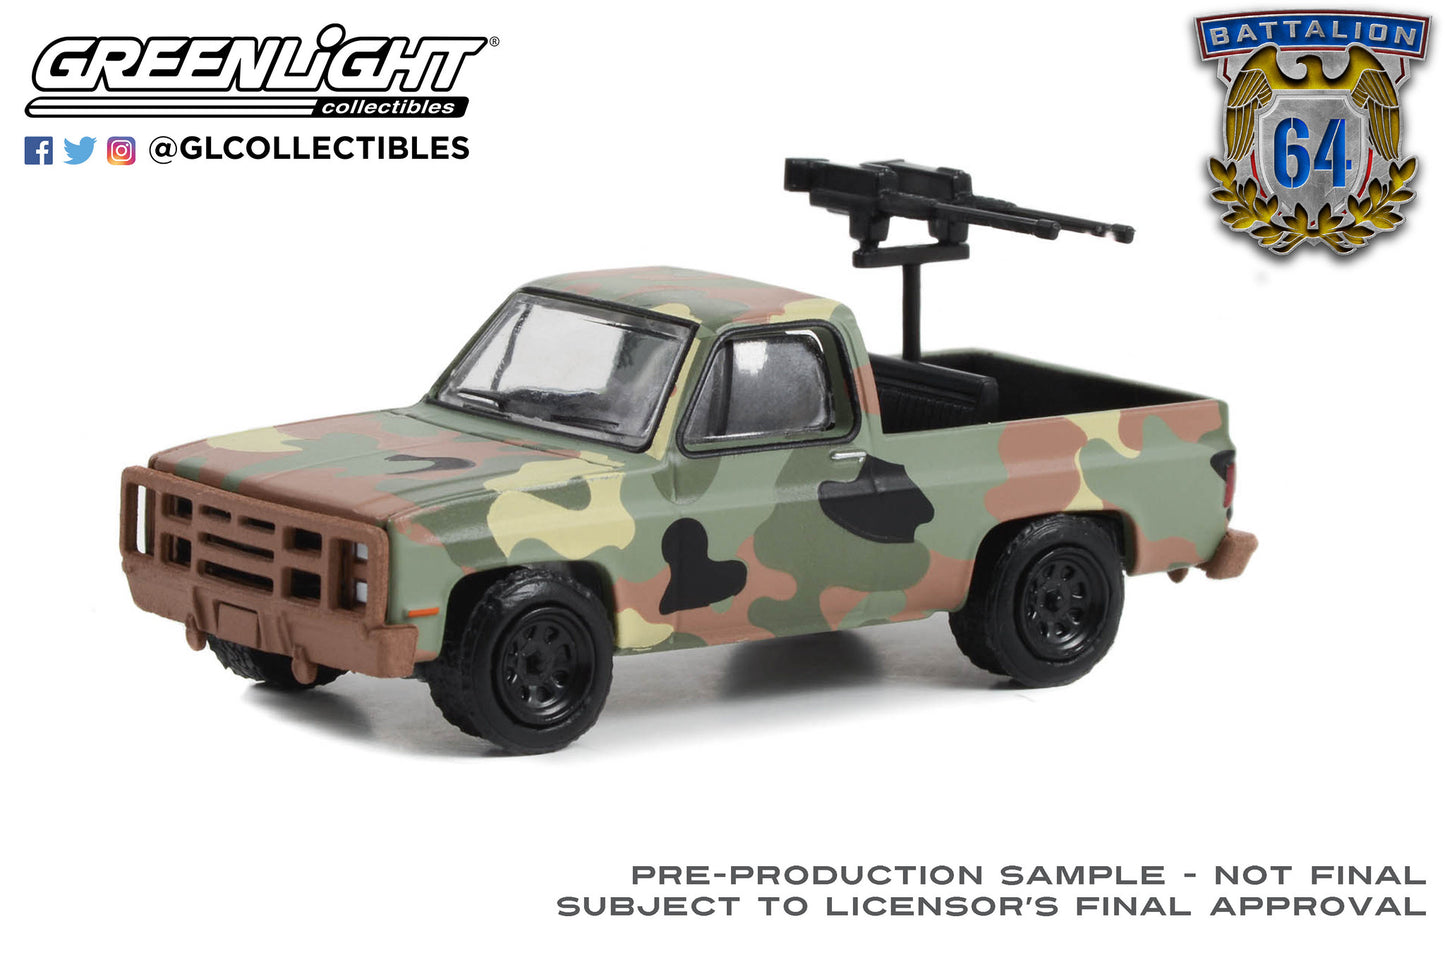 GreenLight 1:64 Battalion 64 Series 3 - 1984 Chevrolet M1009 CUCV in Camouflage with Mounted Machine Guns 61030-E